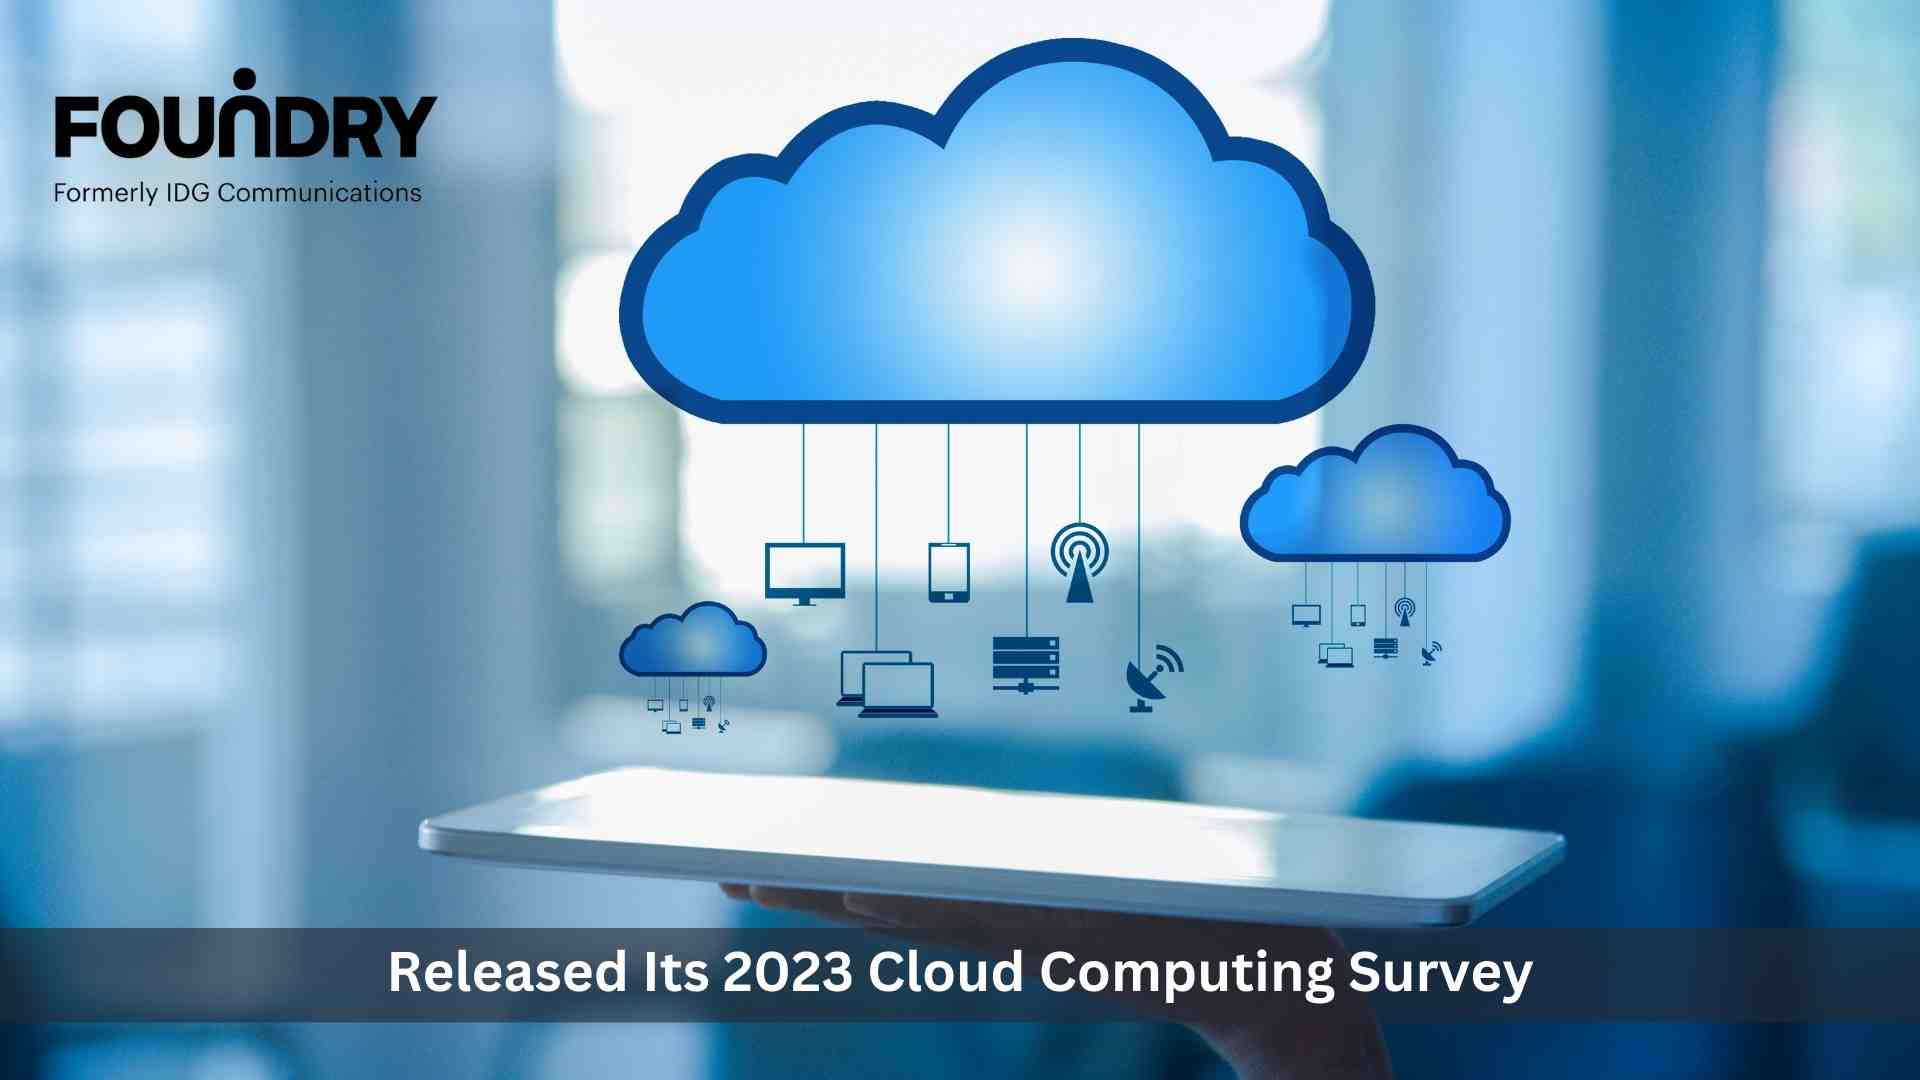 Report: More than half of IT decision-makers report that their organization is likely to adopt AI cloud capabilities over the next 12 month